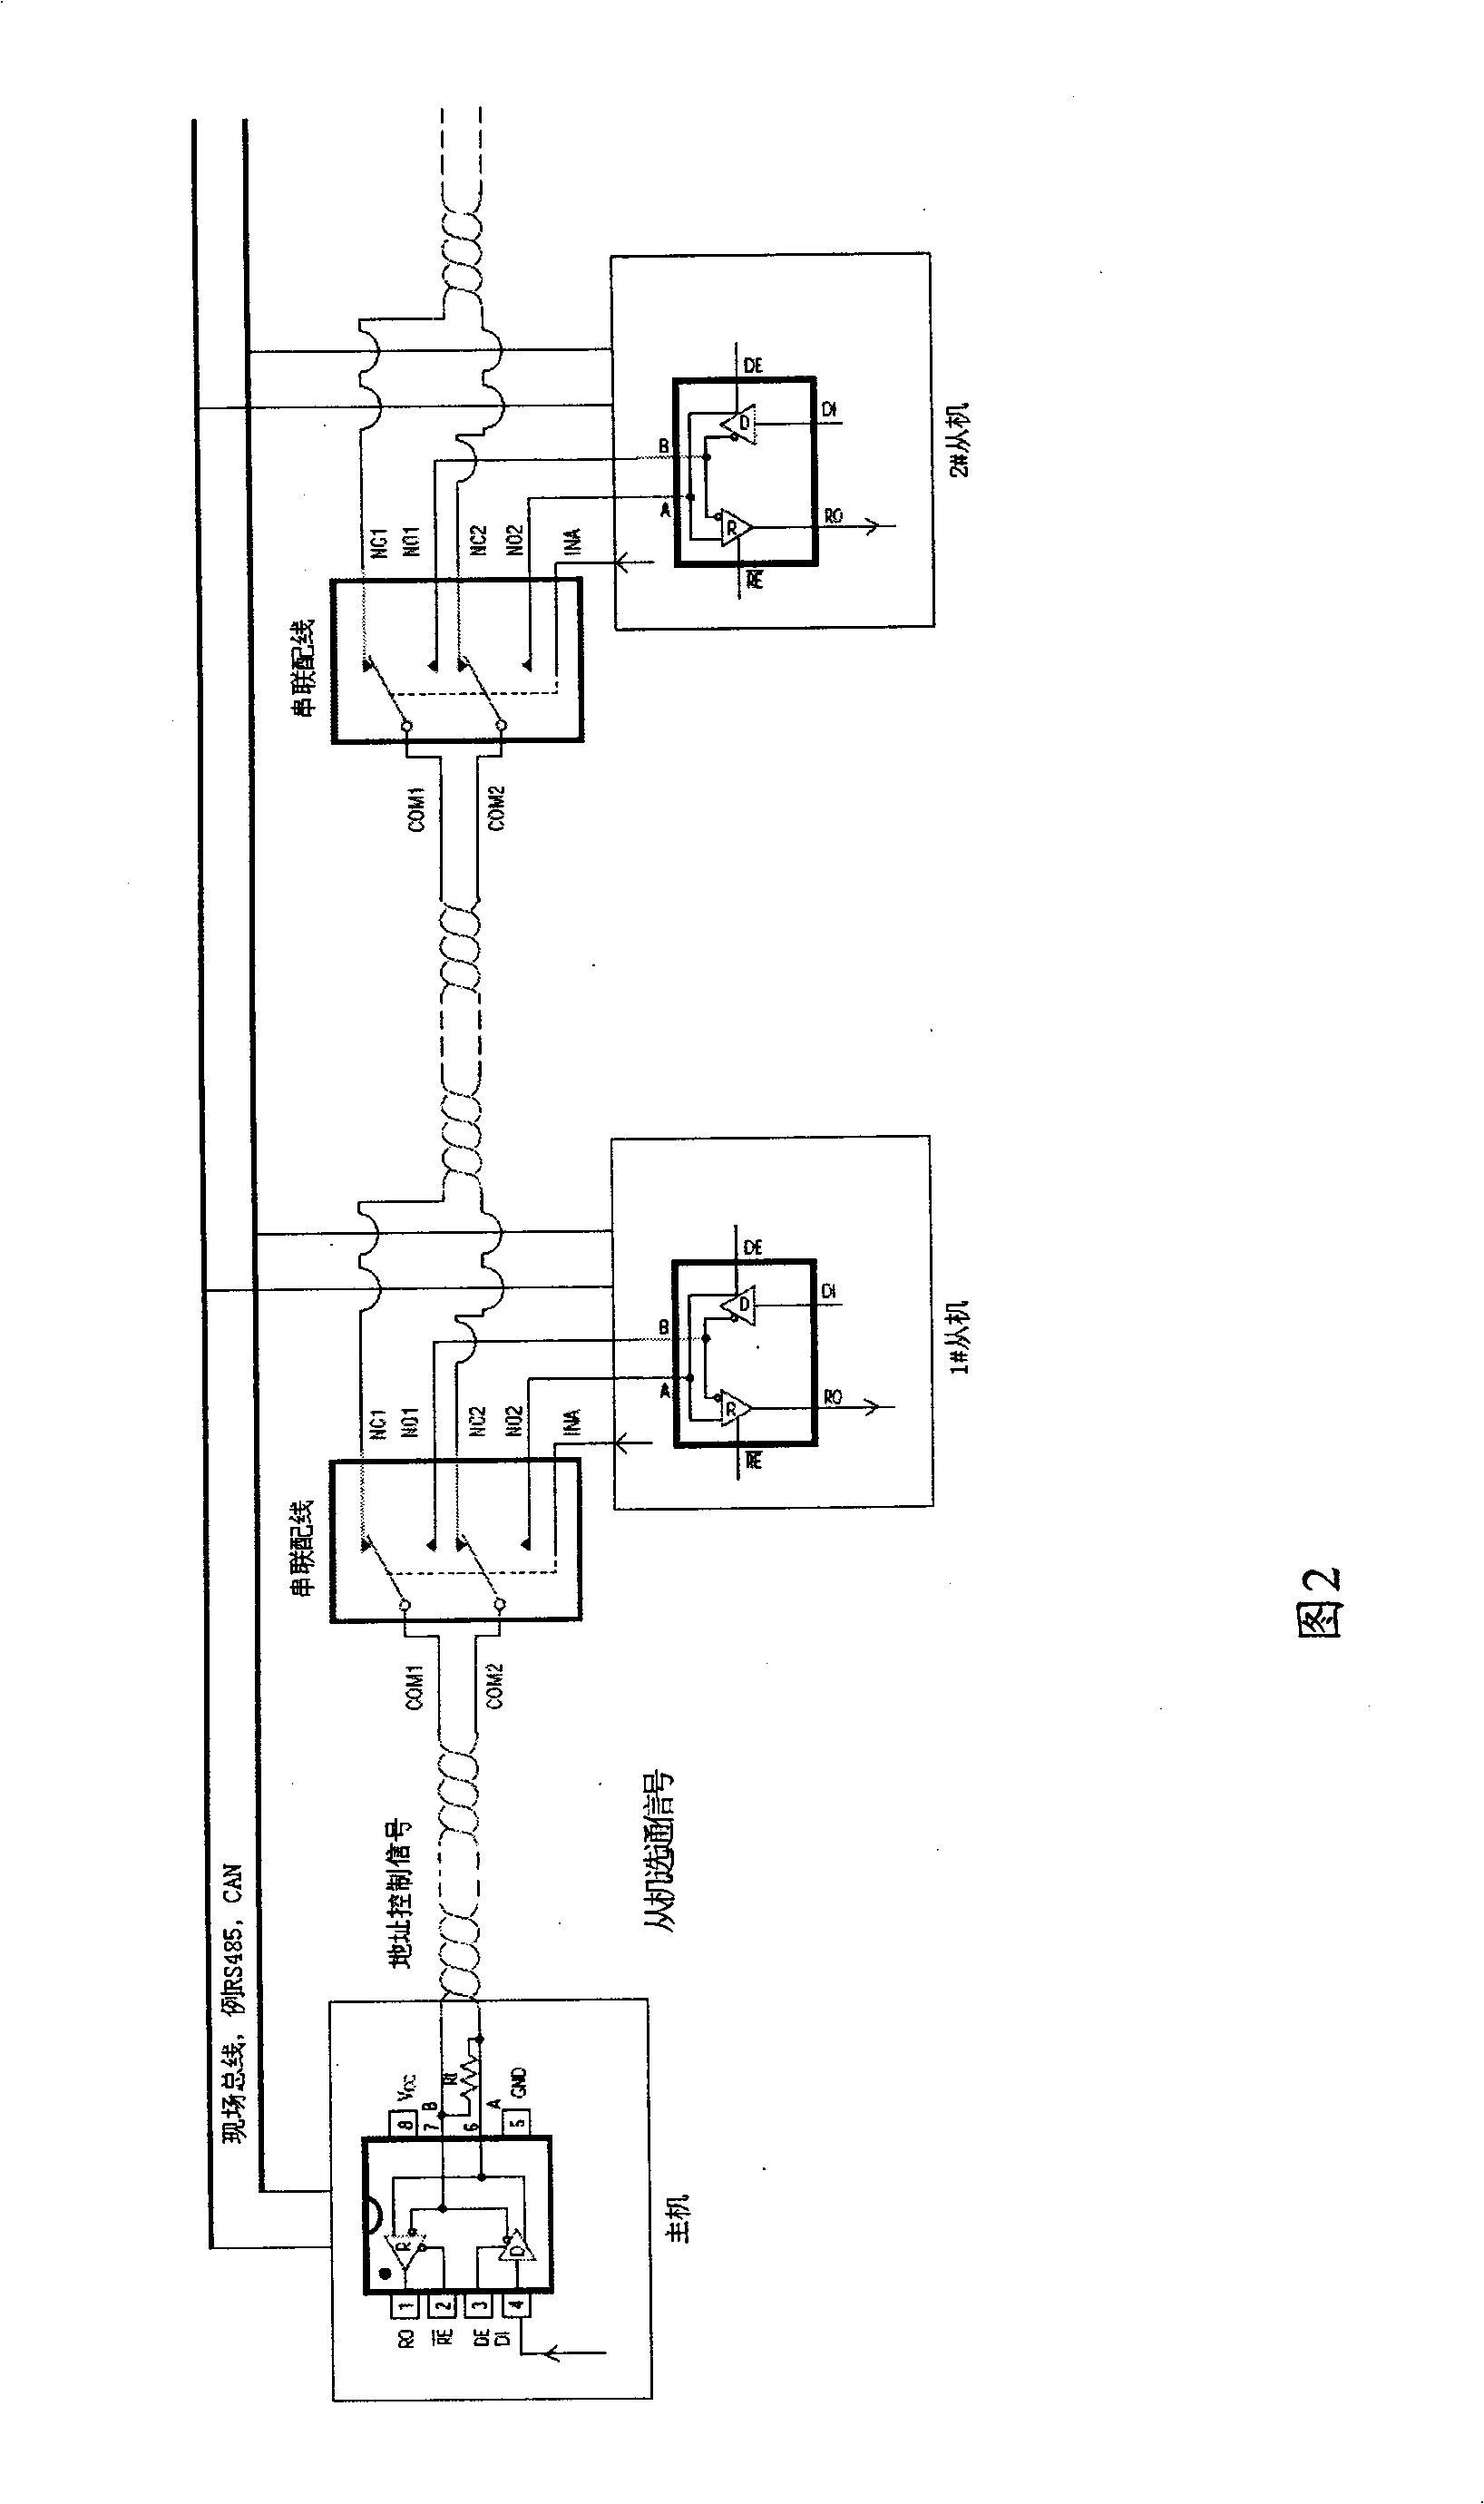 Equipment, method and system for implementing identification of embedded device address sequence